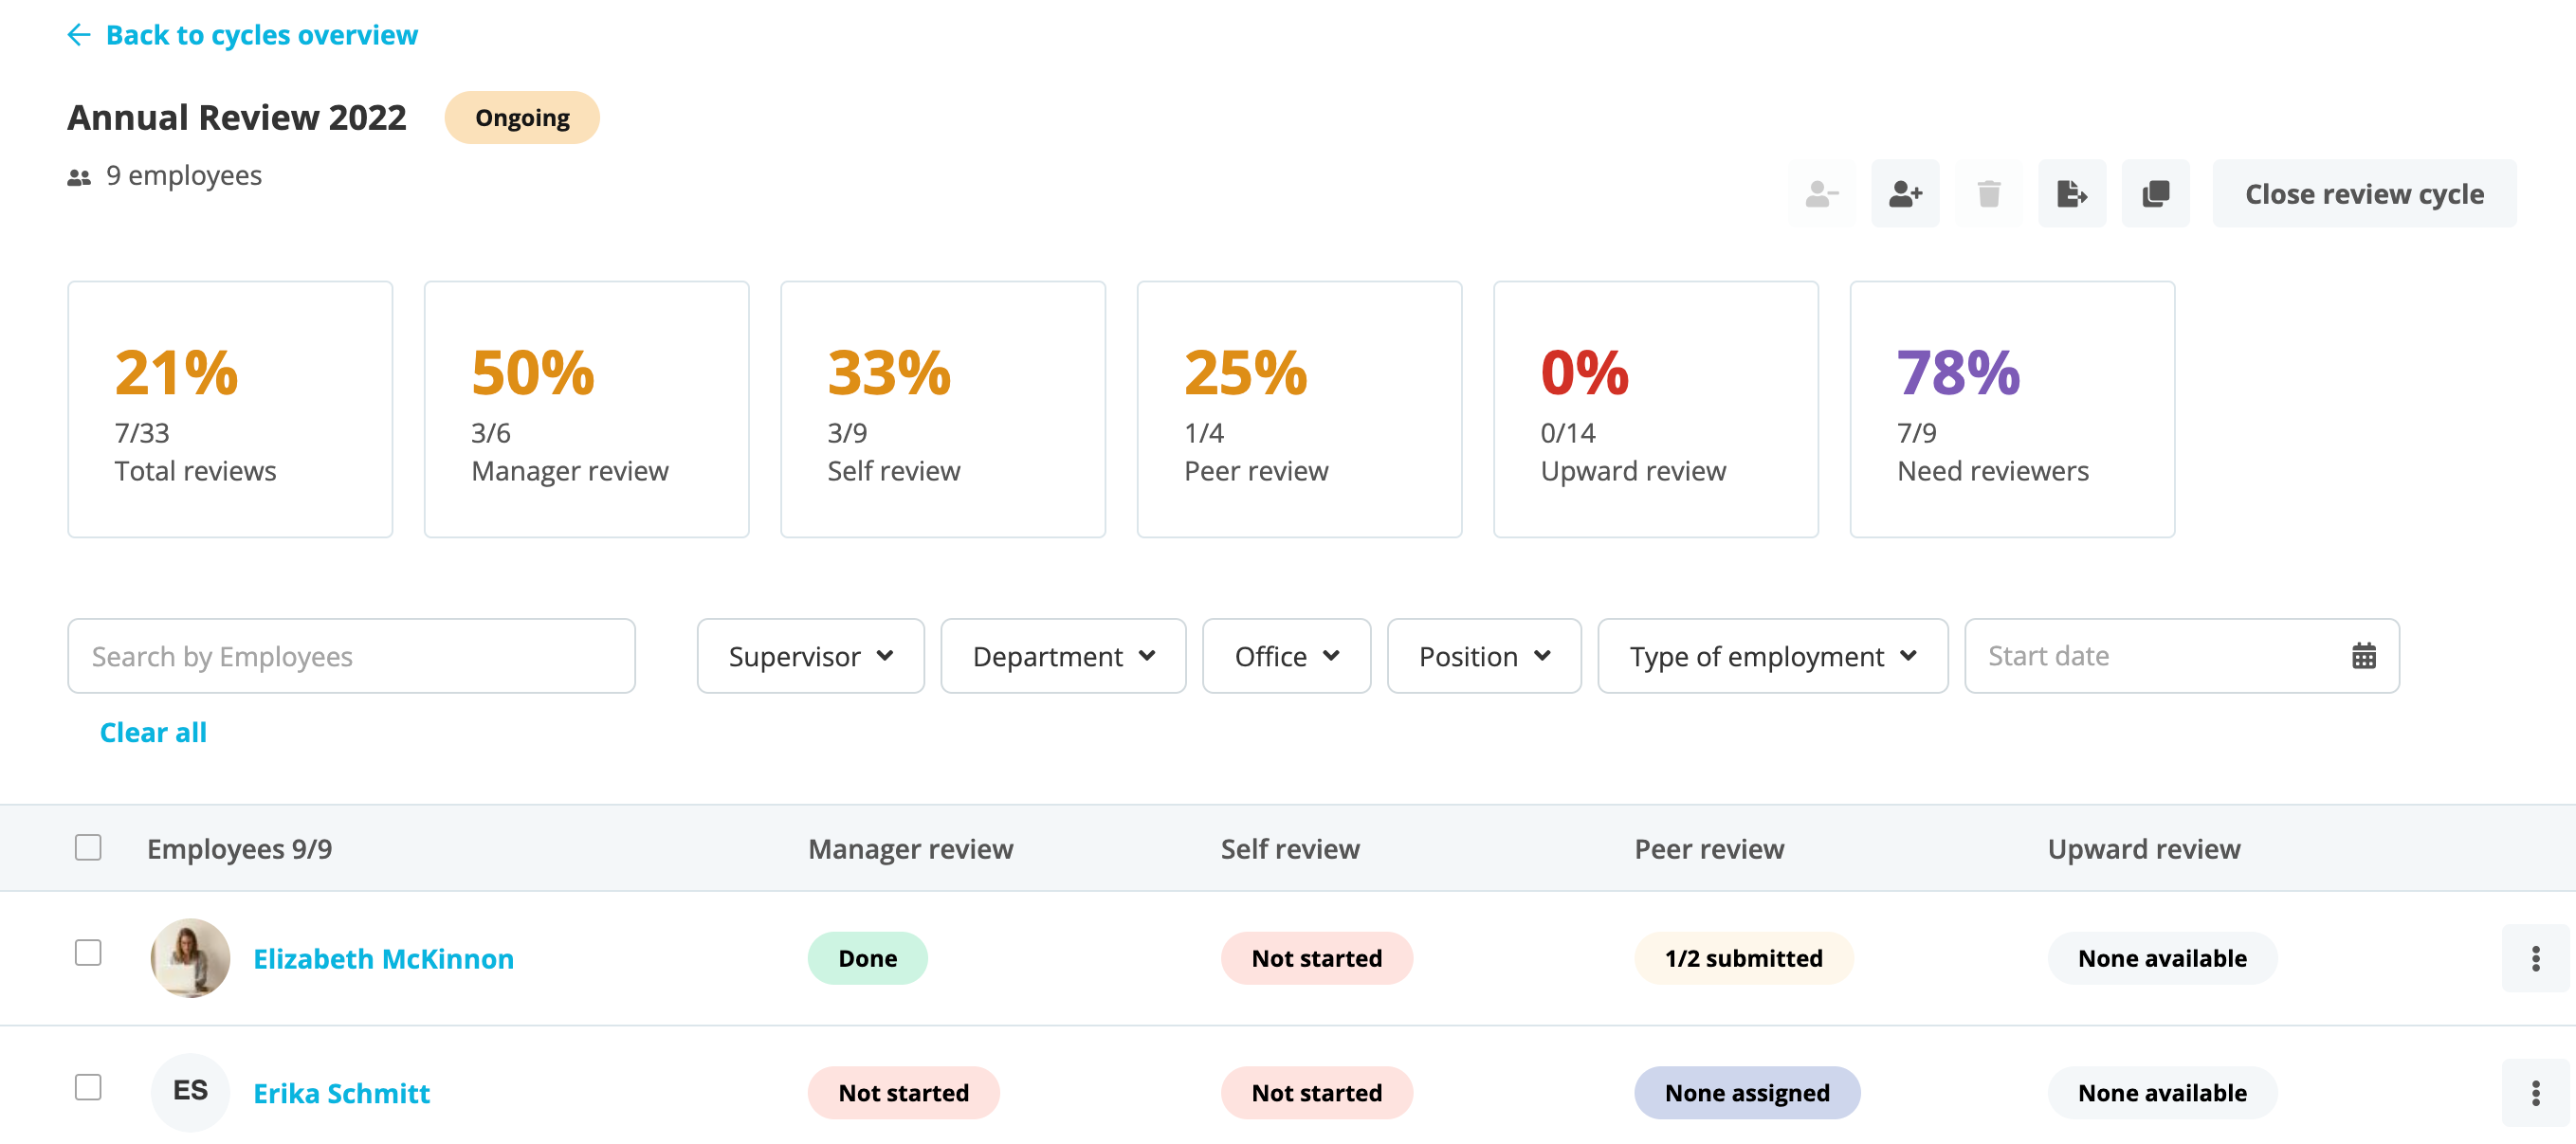 New in Personio: Improvements in the Performance Review Cycle Details Page